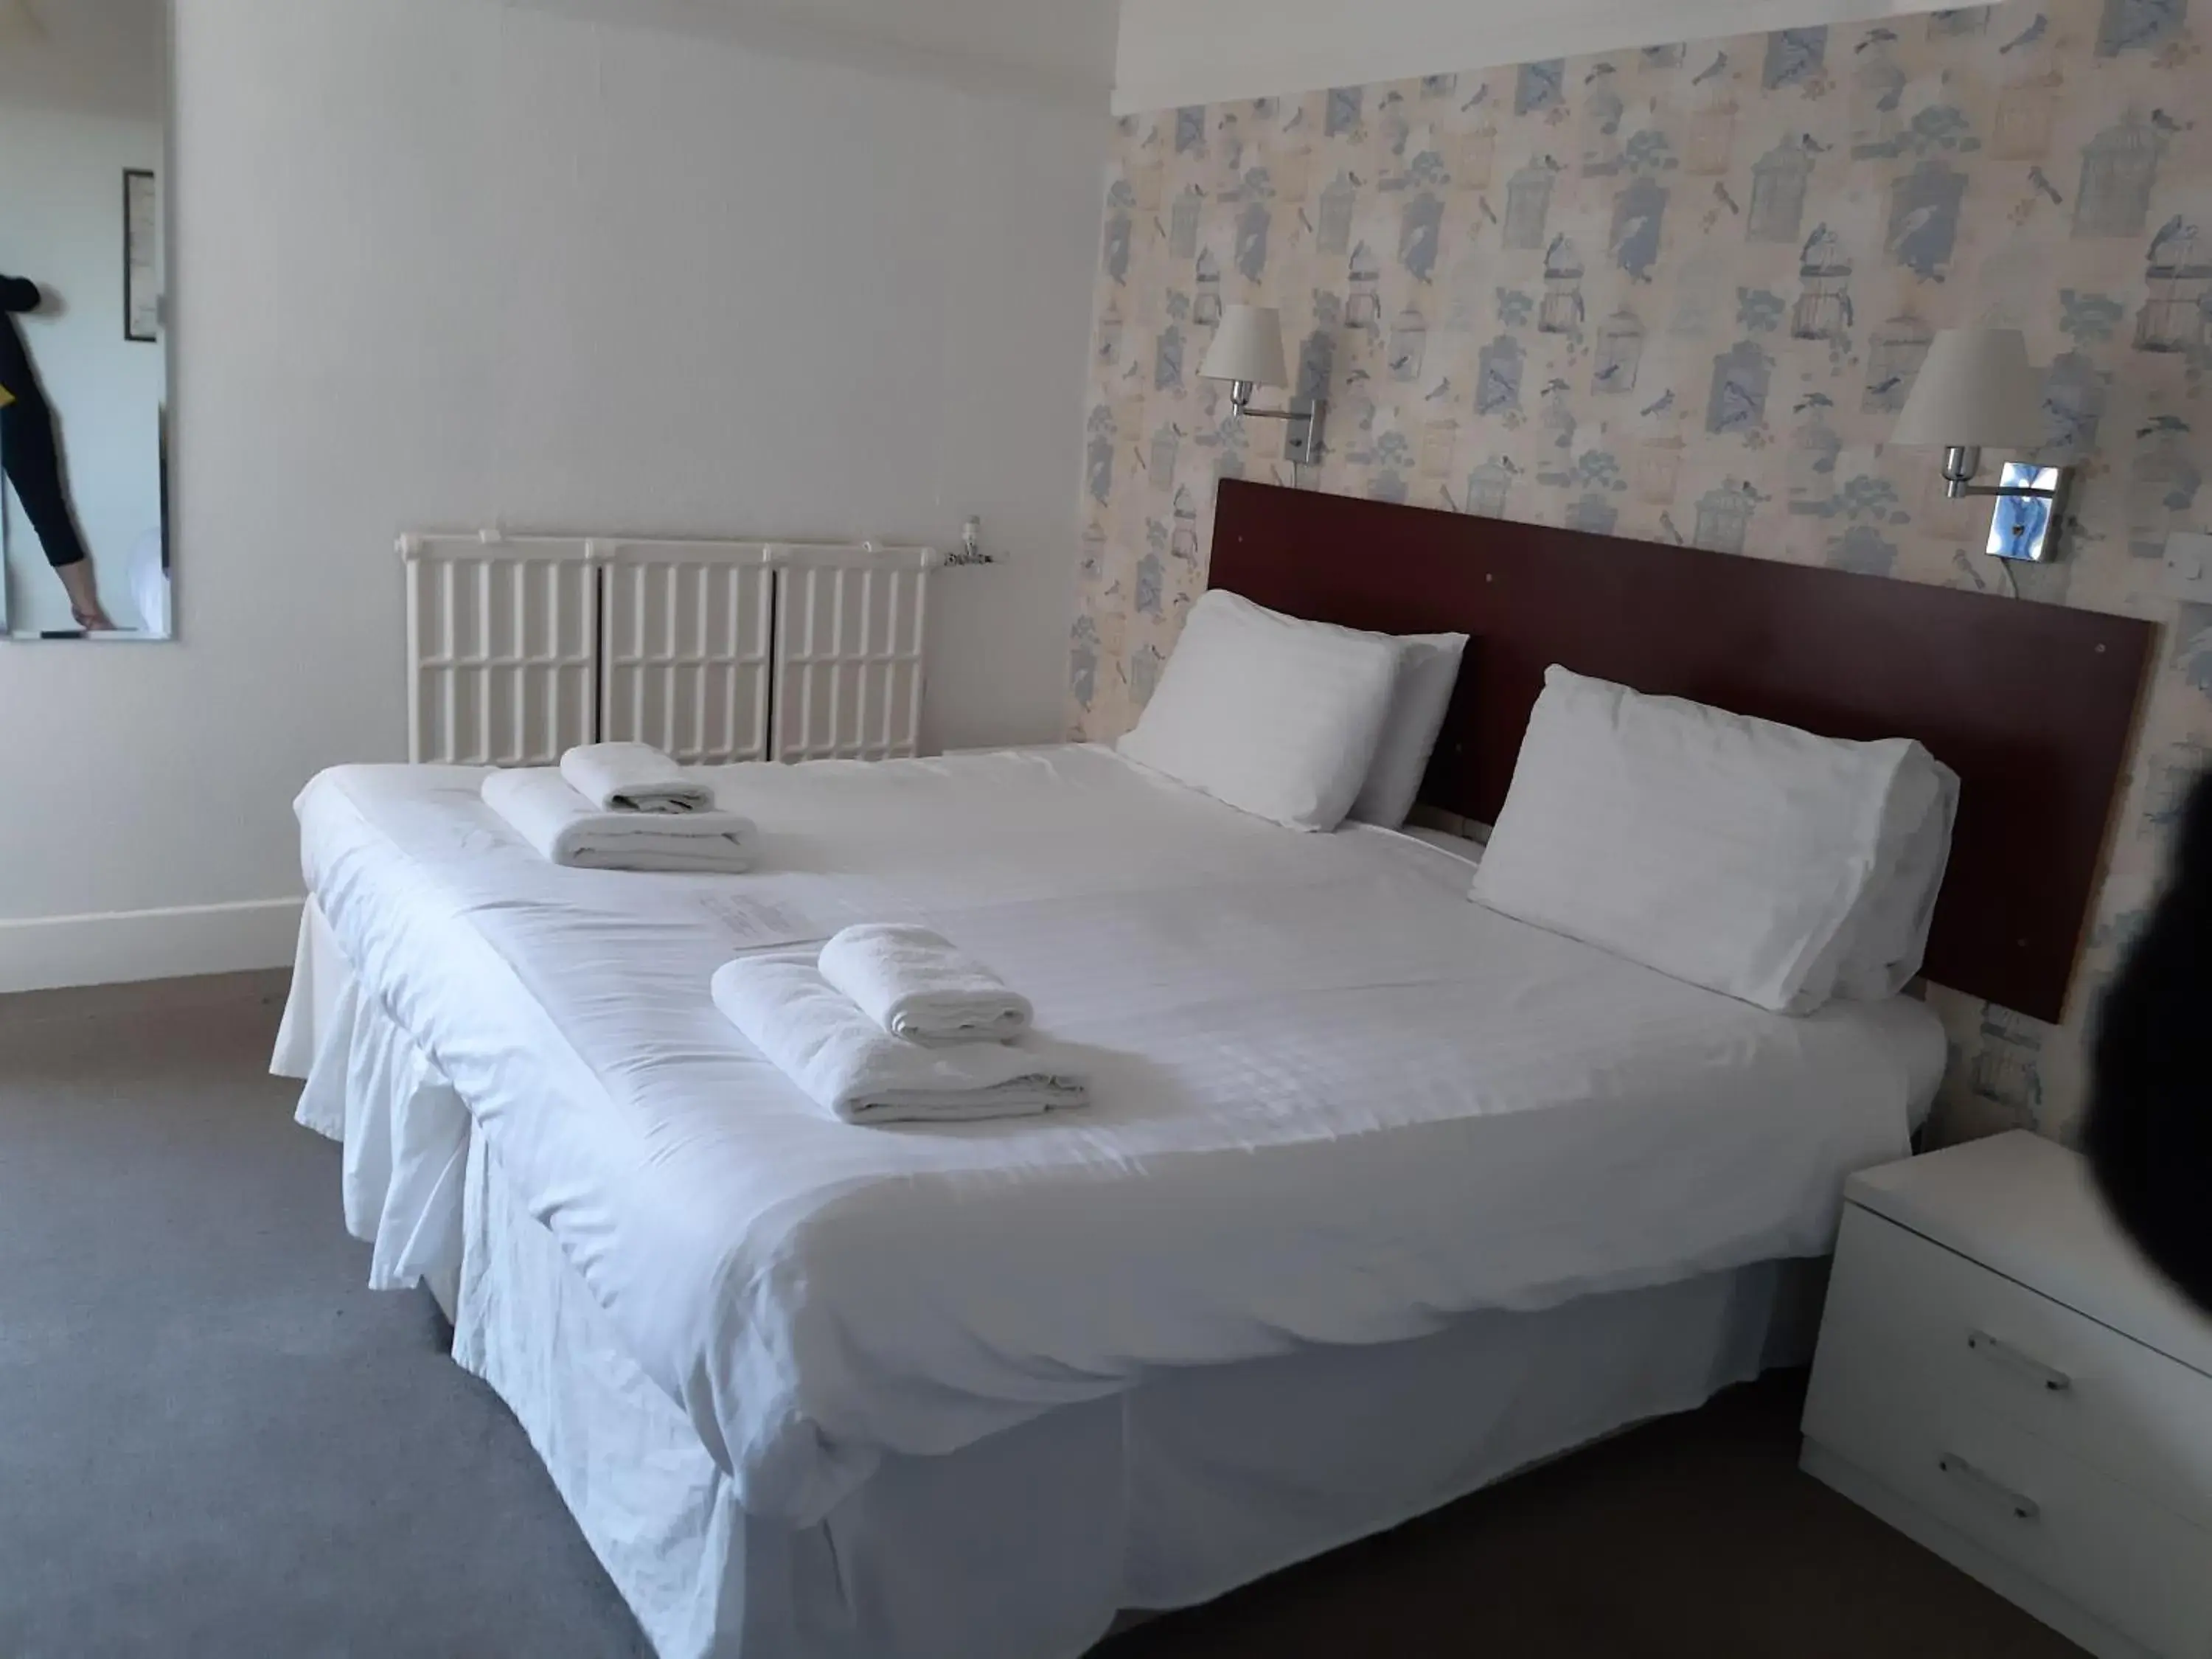 Bed in North Parade Seafront Accommodation